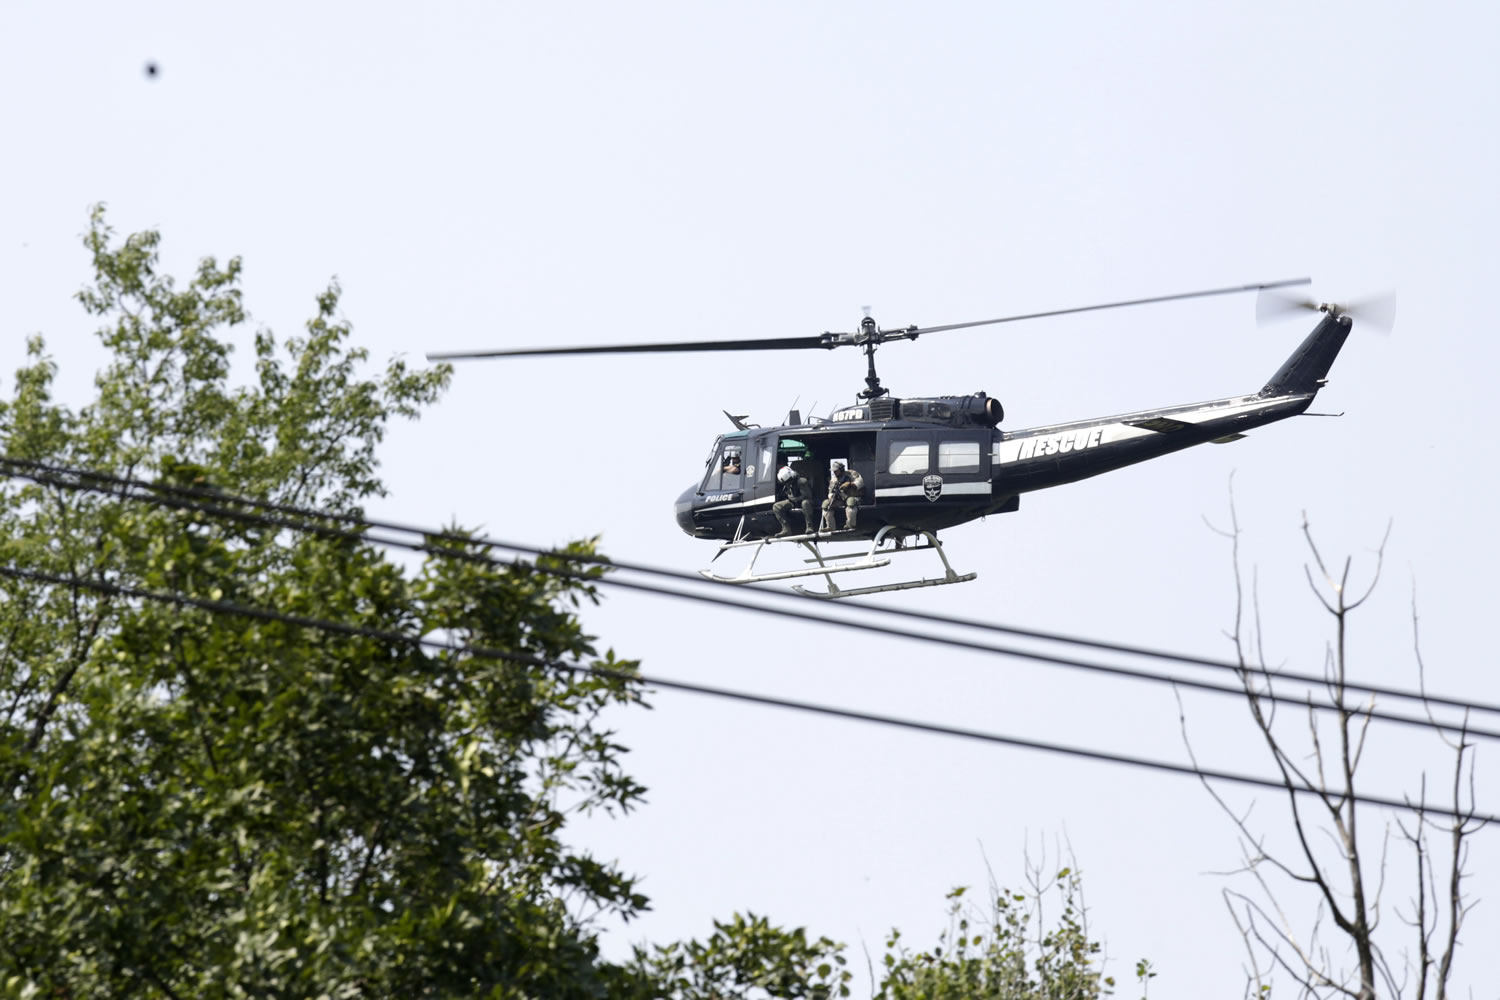 A police helicopter patrols a swampy area near route 59 and Rollins in Fox Lake, Ill., during a manhunt after an officer was shot and killed while pursuing a group of suspicious men, Tuesday.